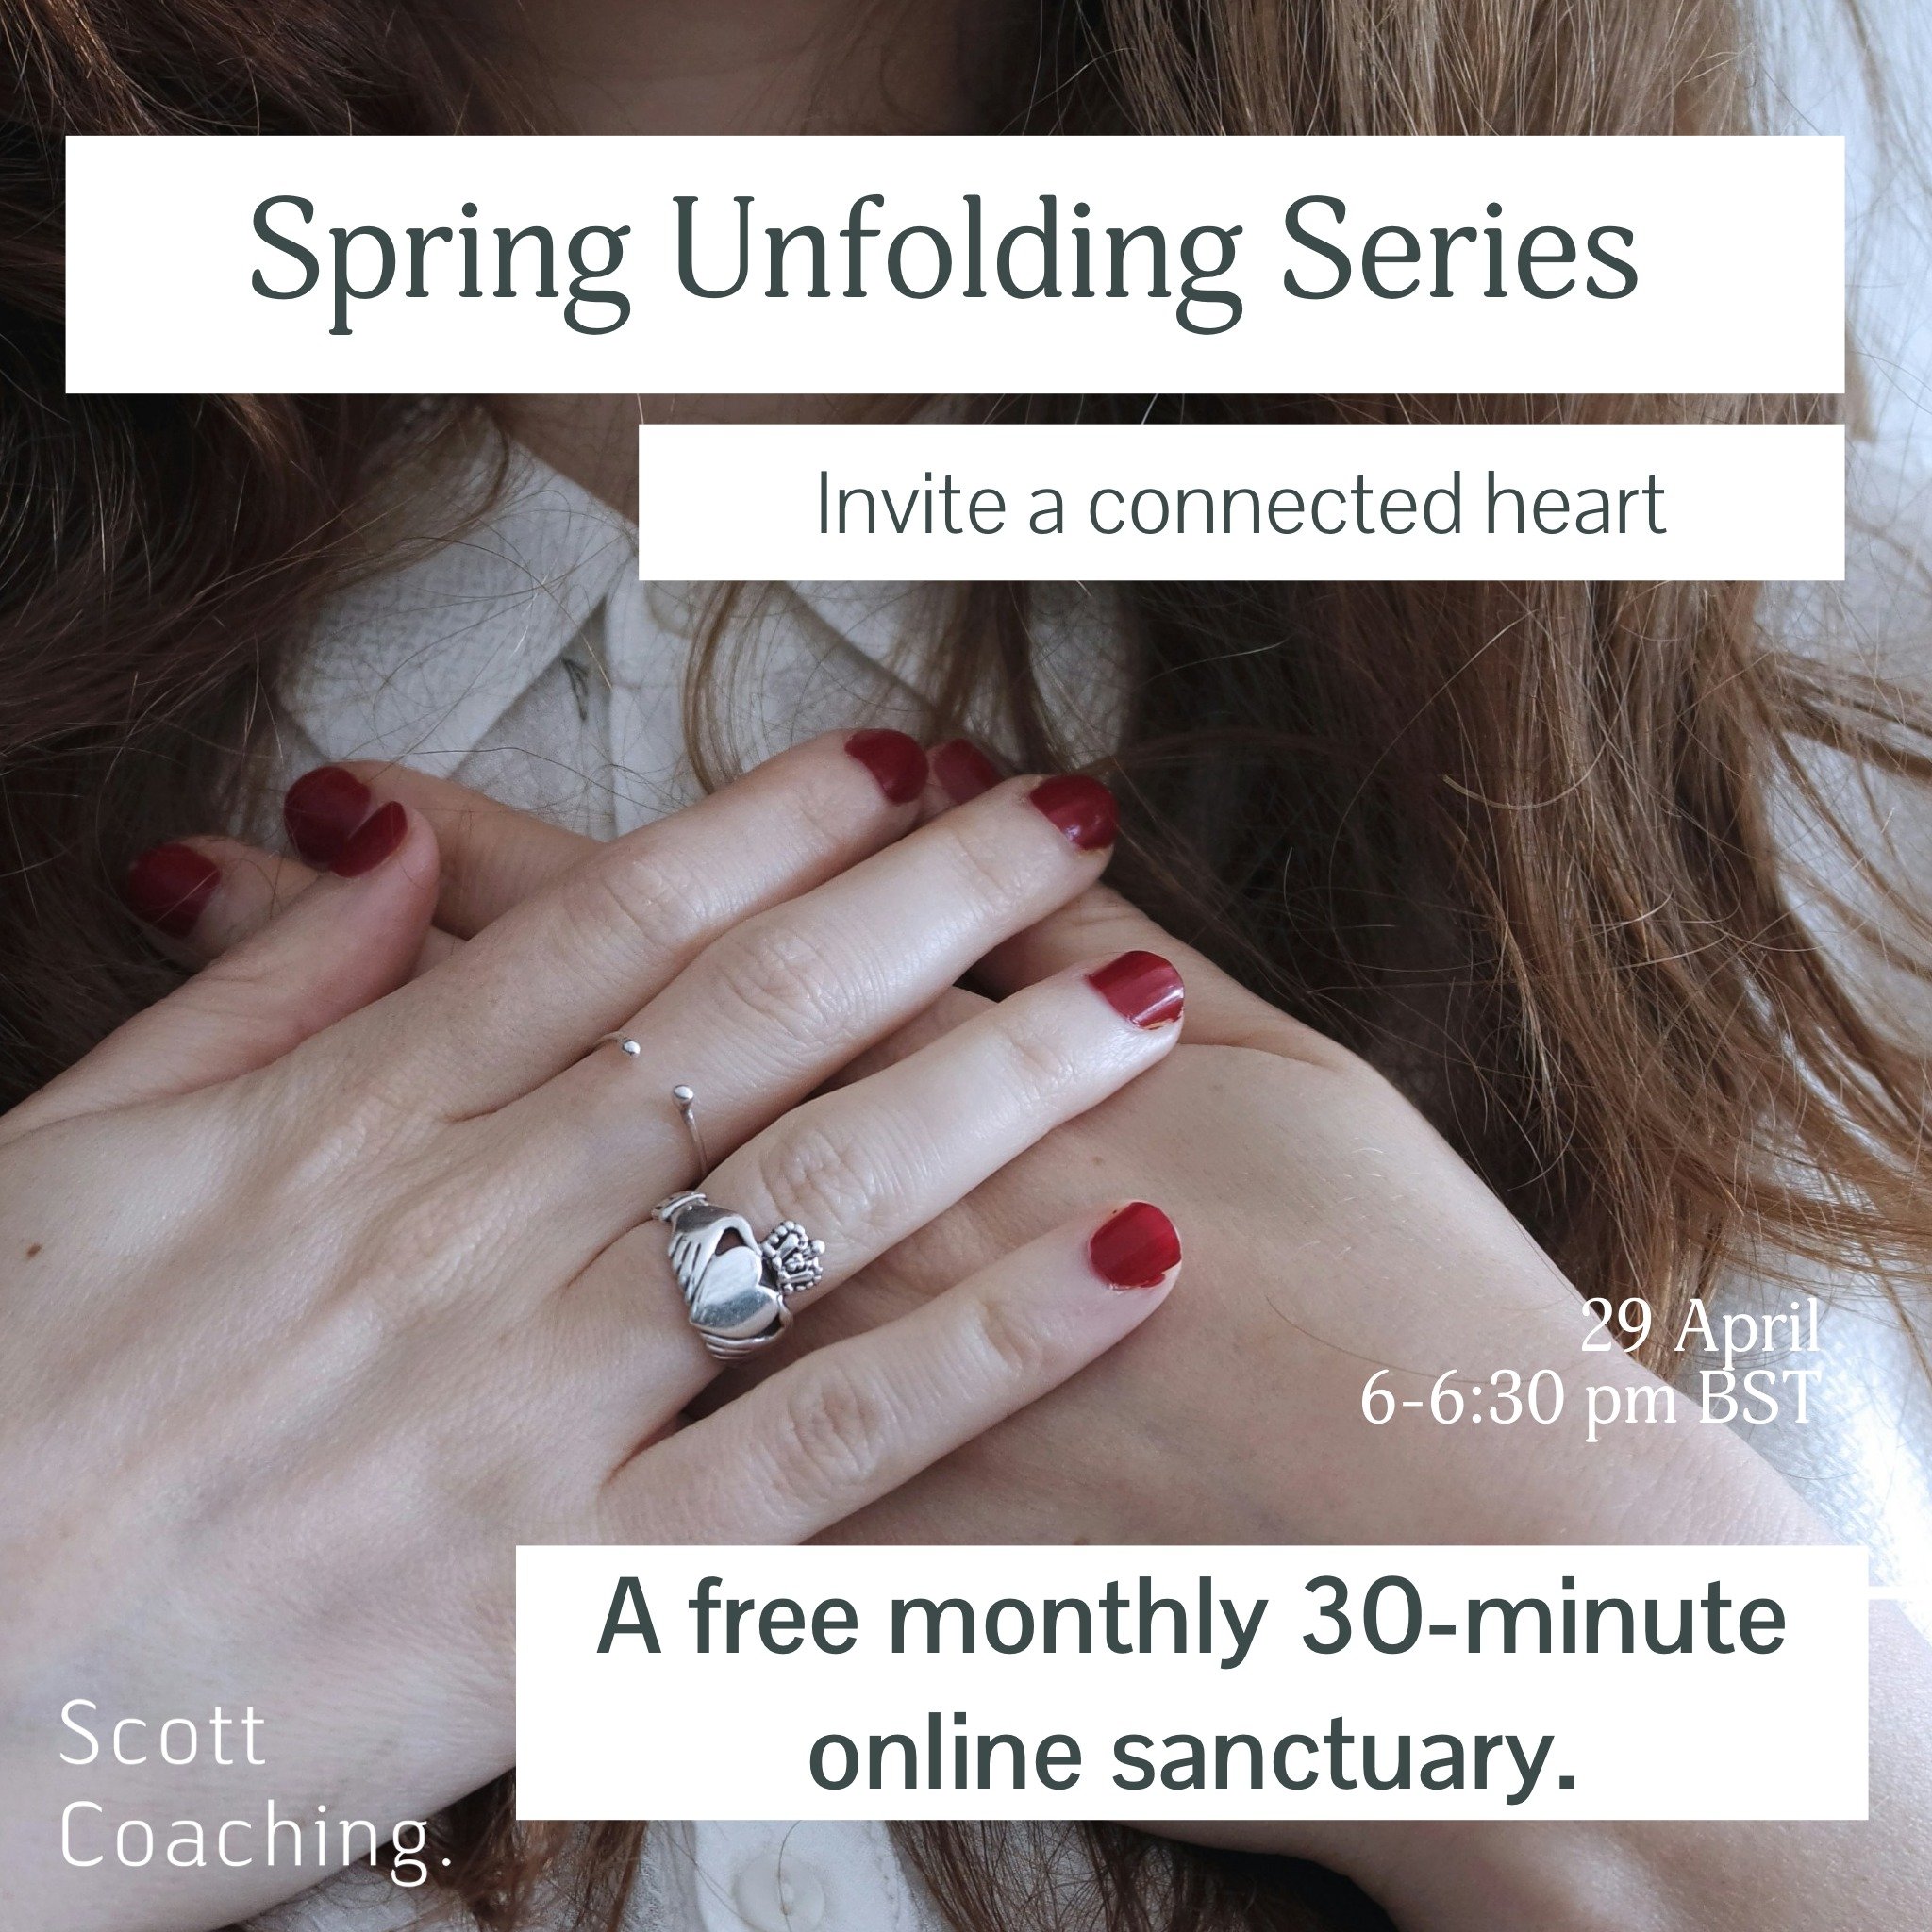 Join us tonight for the second session in the Spring Unfolding series! I'm excited to connect with all of you this evening at 6 pm BST (8 pm SAST).

If you're currently navigating a significant change in your life, this free 30-minute session will pr